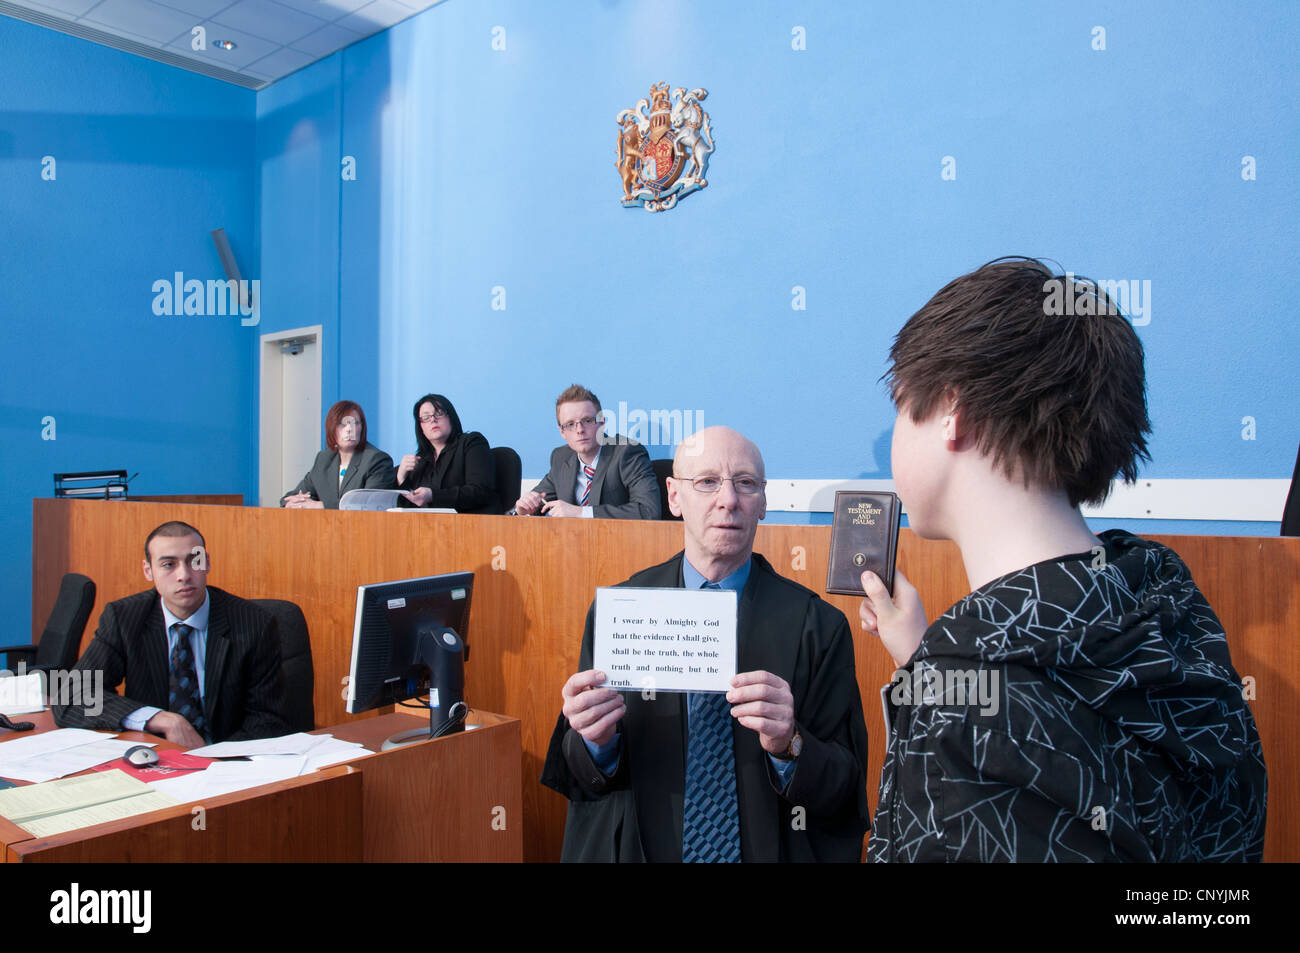 A witness swearing the oath in a magistrates' court Stock Photo